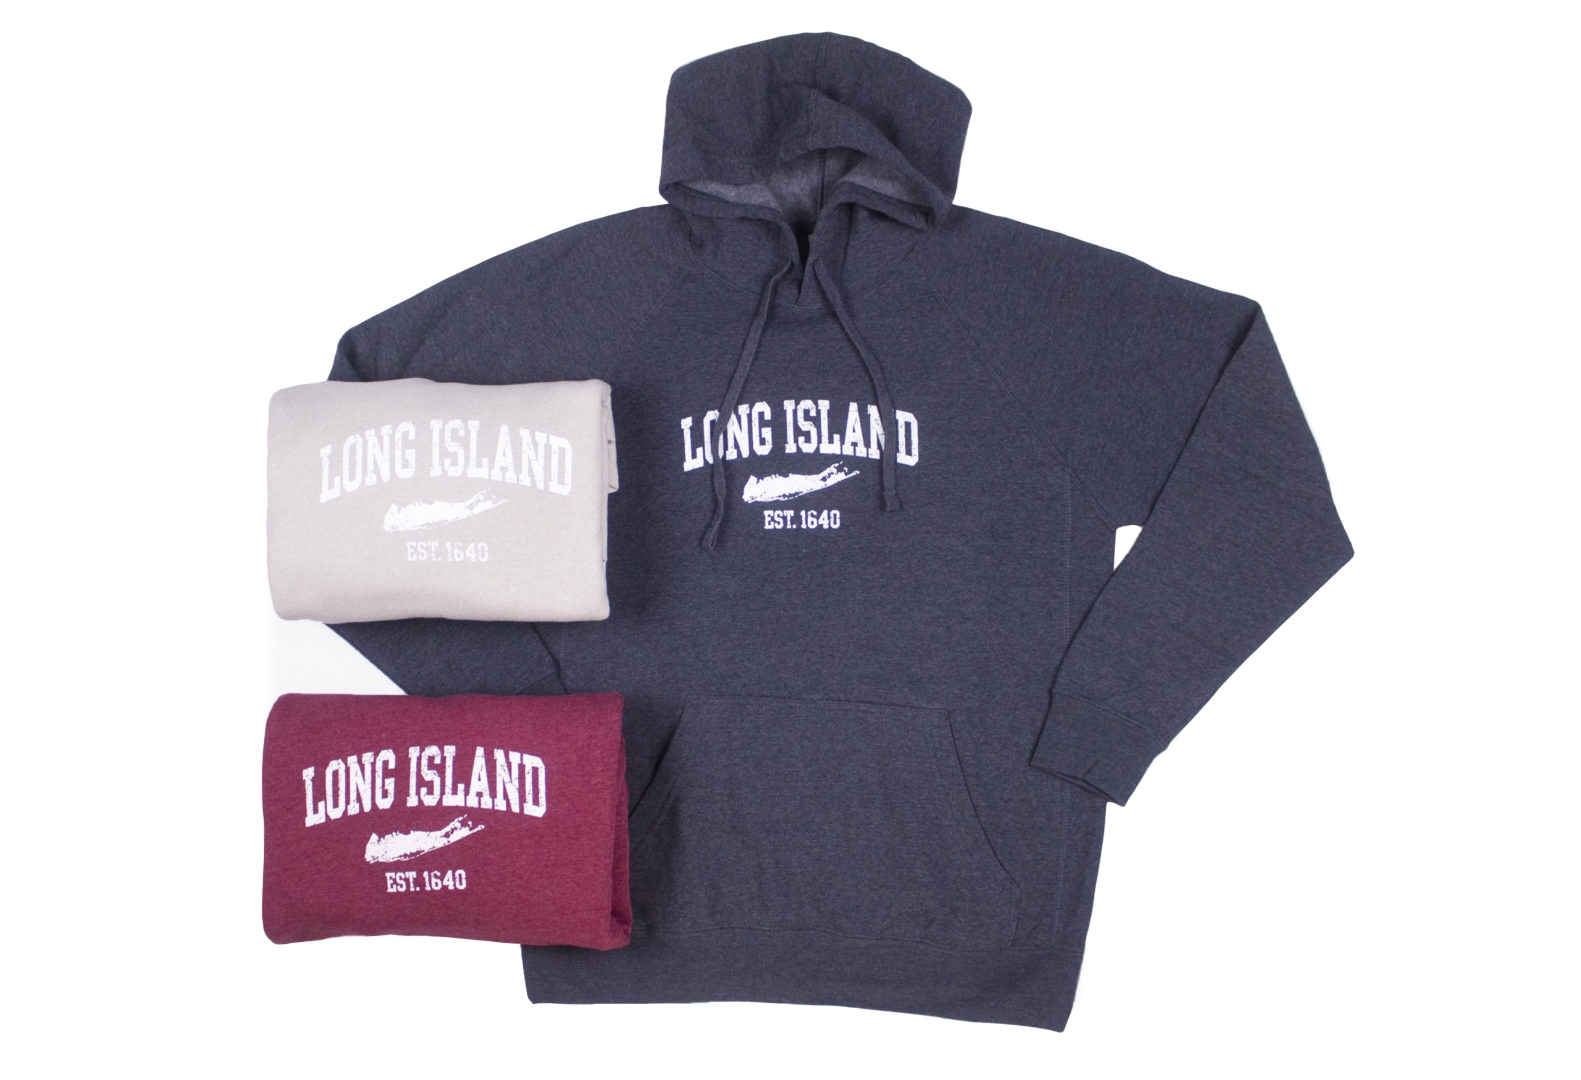 unfolded and folded hoodies